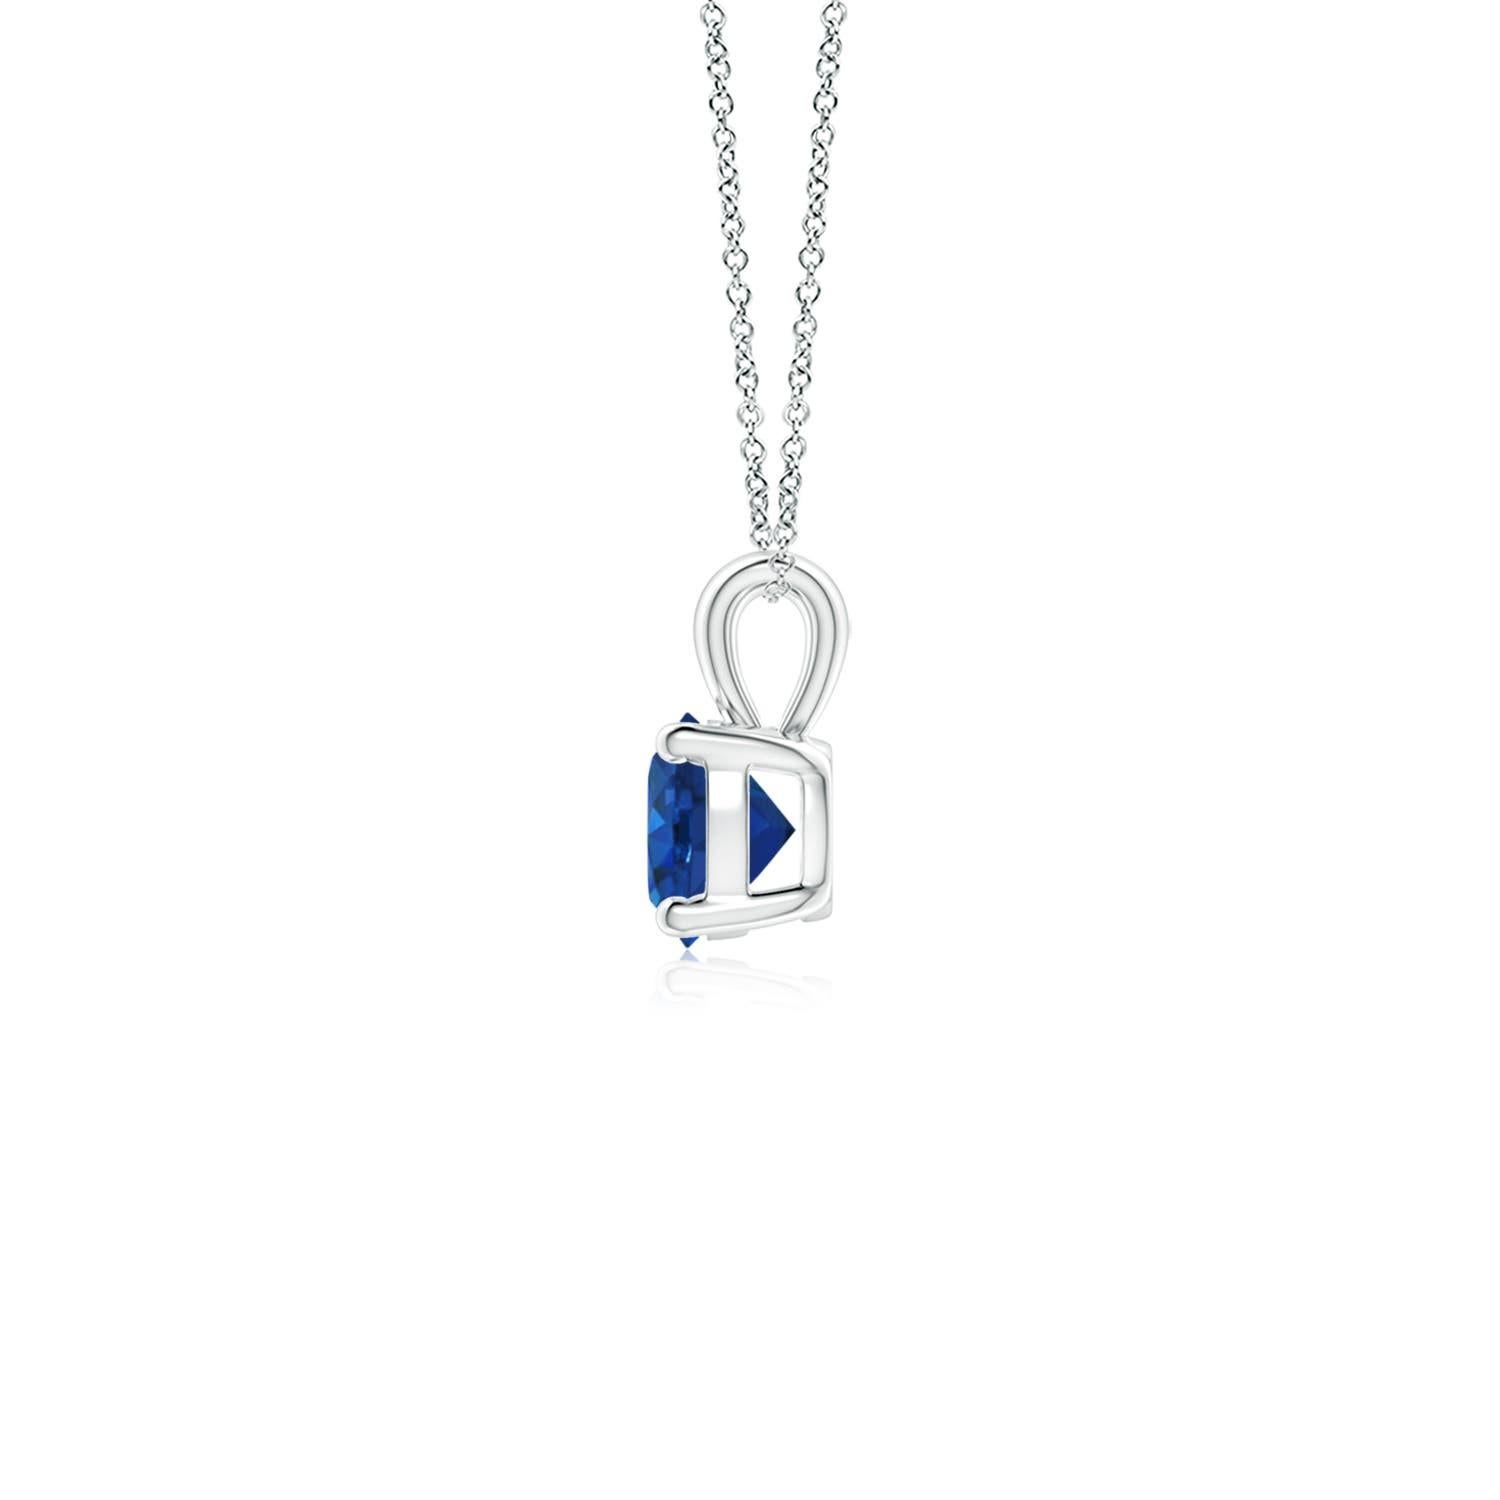 Linked to a lustrous bale is a stunning sapphire solitaire secured in a four prong setting. Crafted in platinum, the elegant design of this classic sapphire pendant draws all attention towards the magnificence of the center stone.
Blue Sapphire is